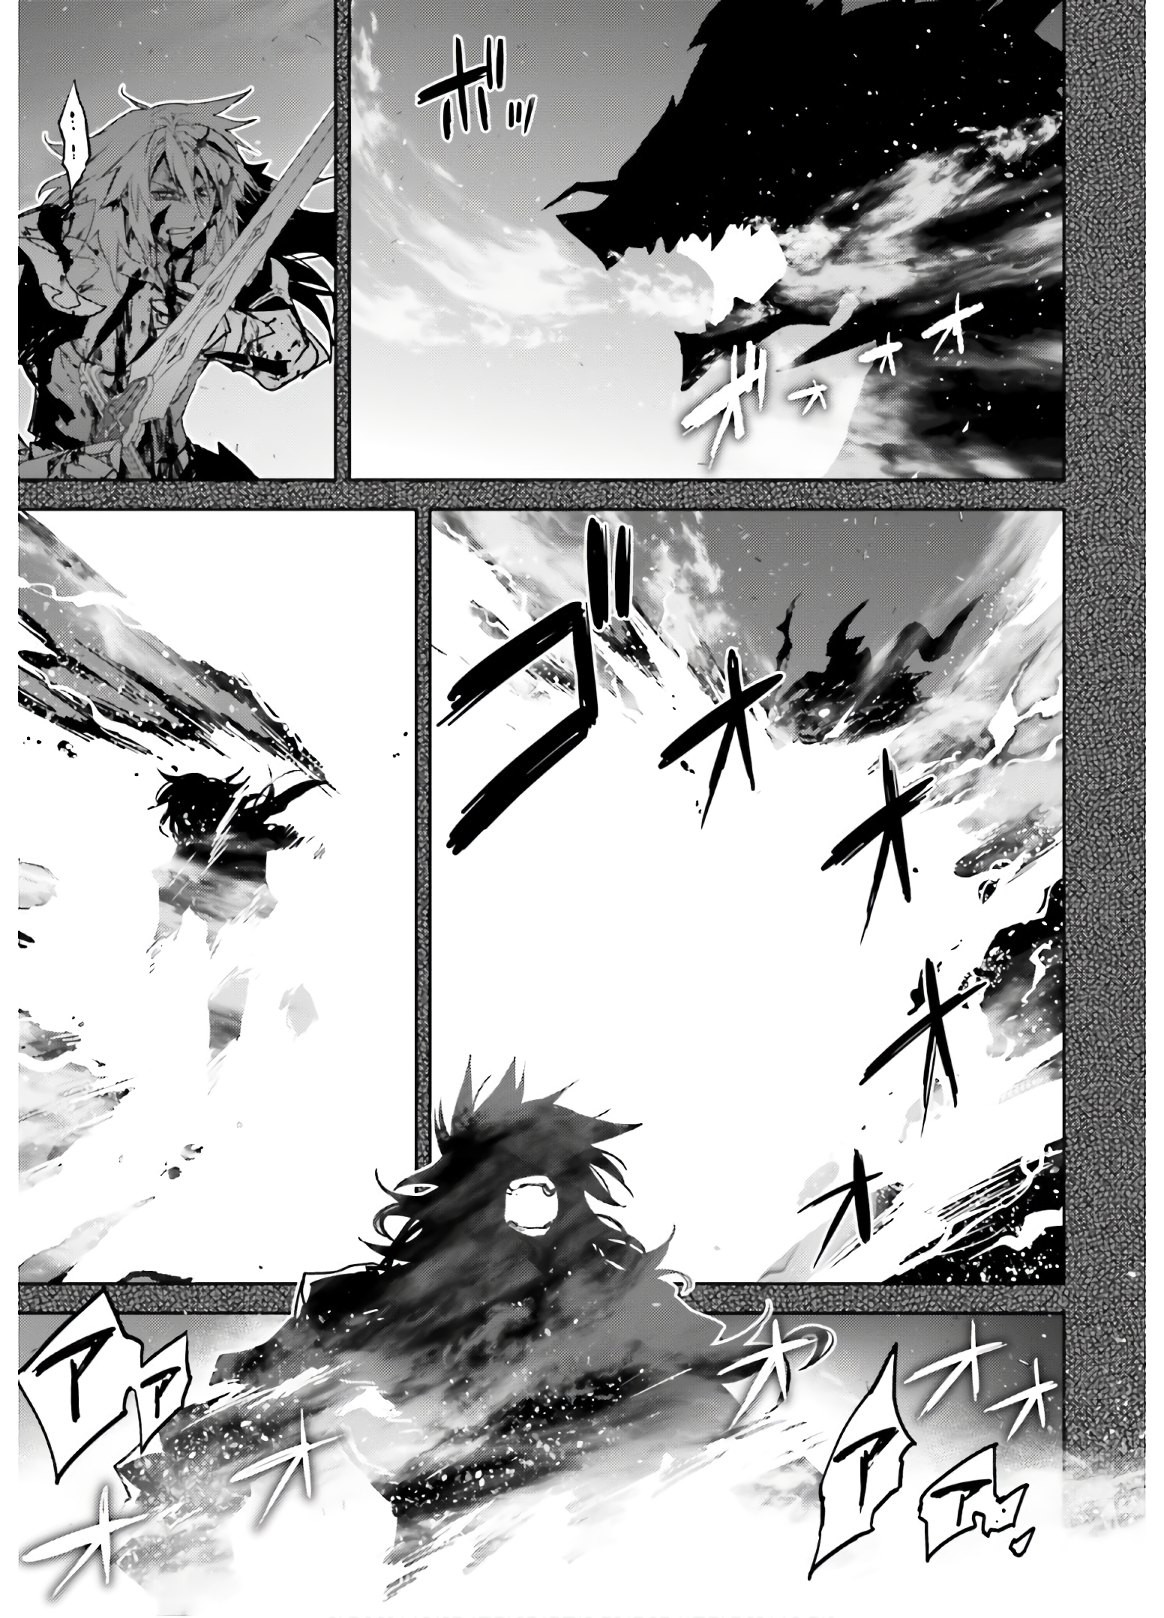 Fate-Apocrypha - Chapter 42-2 - Page 19